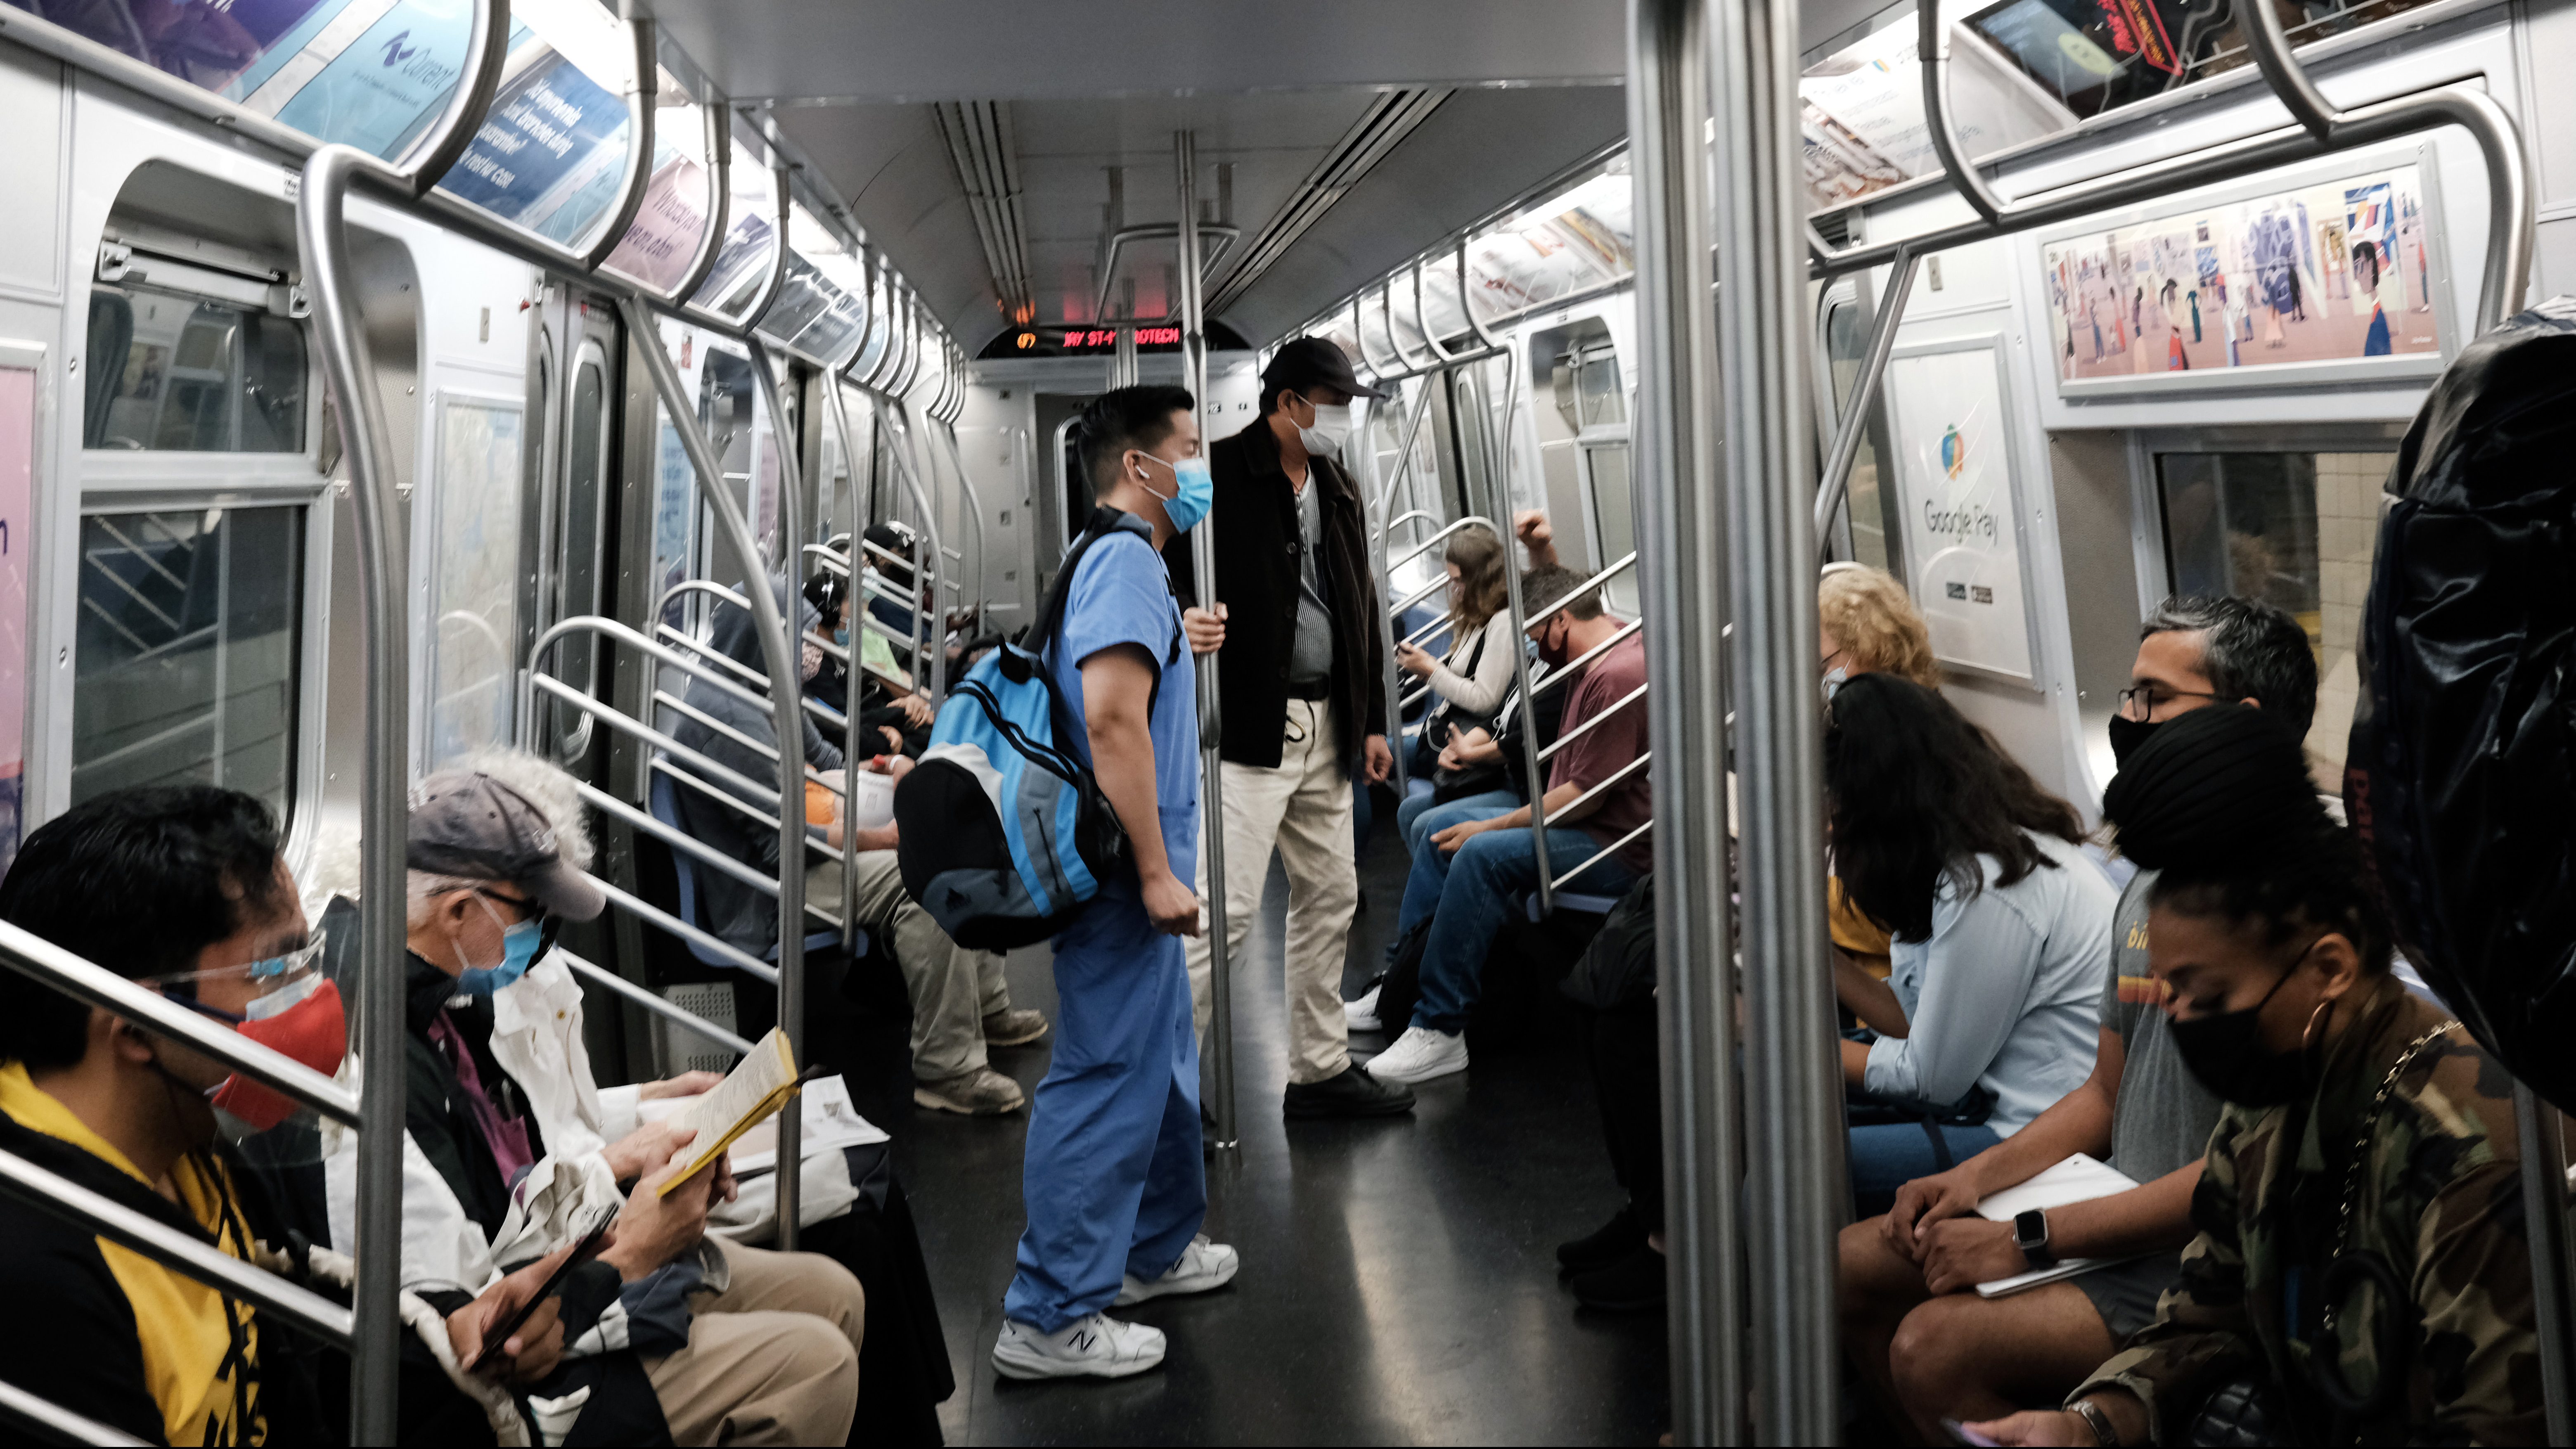 Public transit could get a boost from